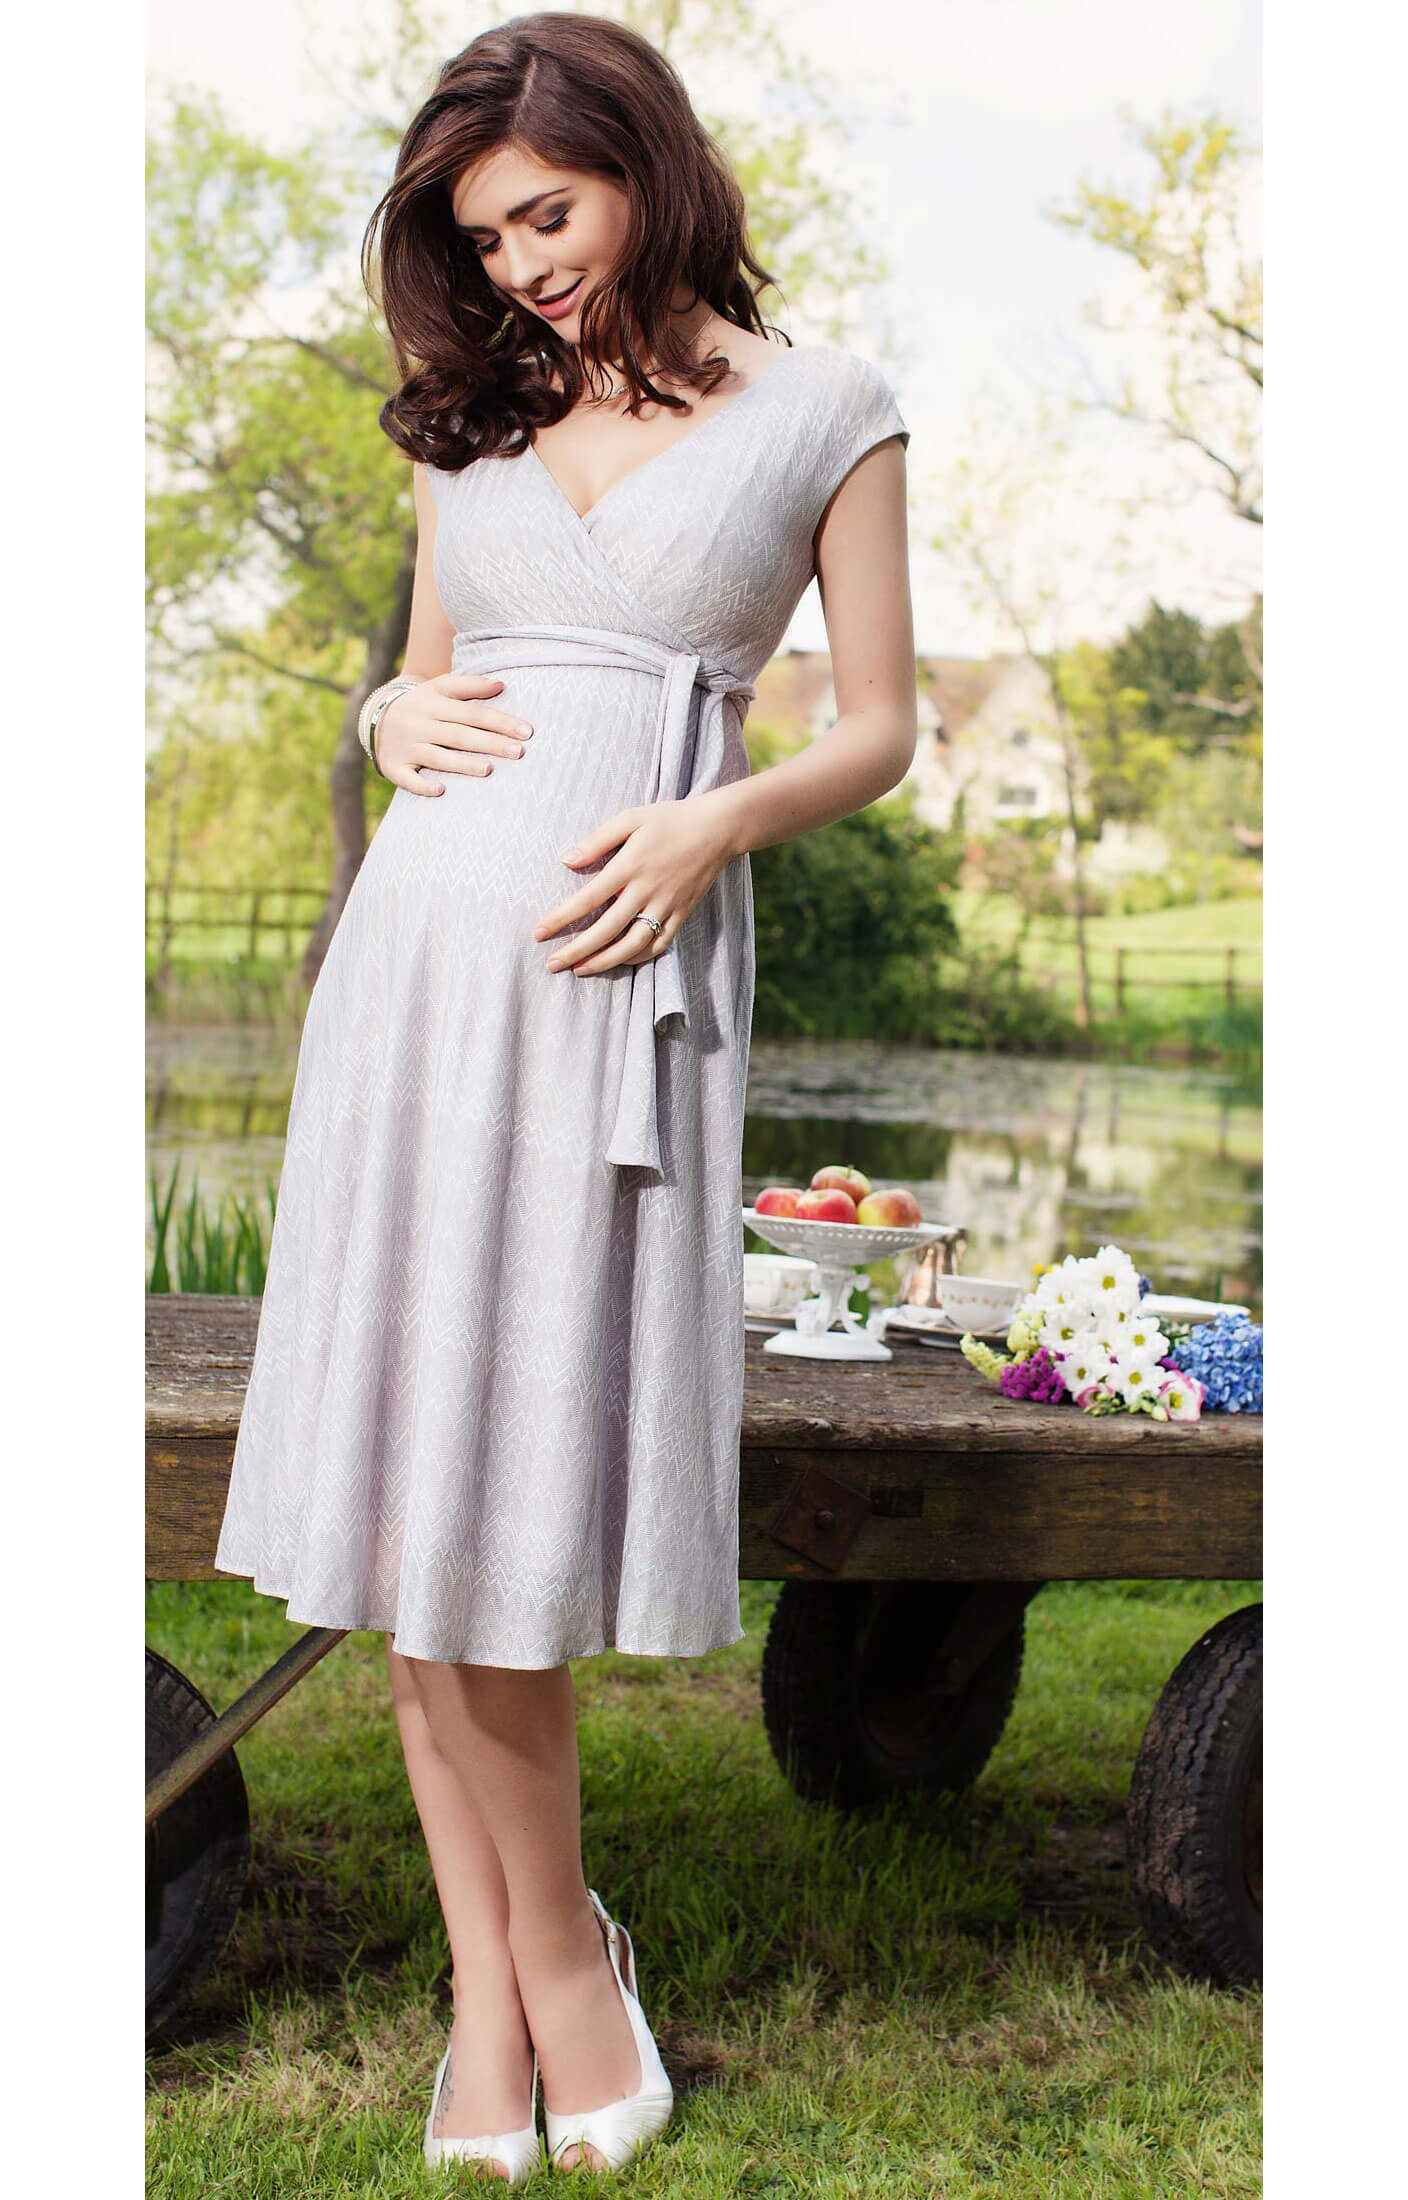  Maternity Shapewear Maternity Dress For Photoshoot Maternity  Clothes Summer Maternity Shapewear Shorts Maternity Shapewear Bodysuit  Pregnancy Clothes For Women Pregnancy Must Haves